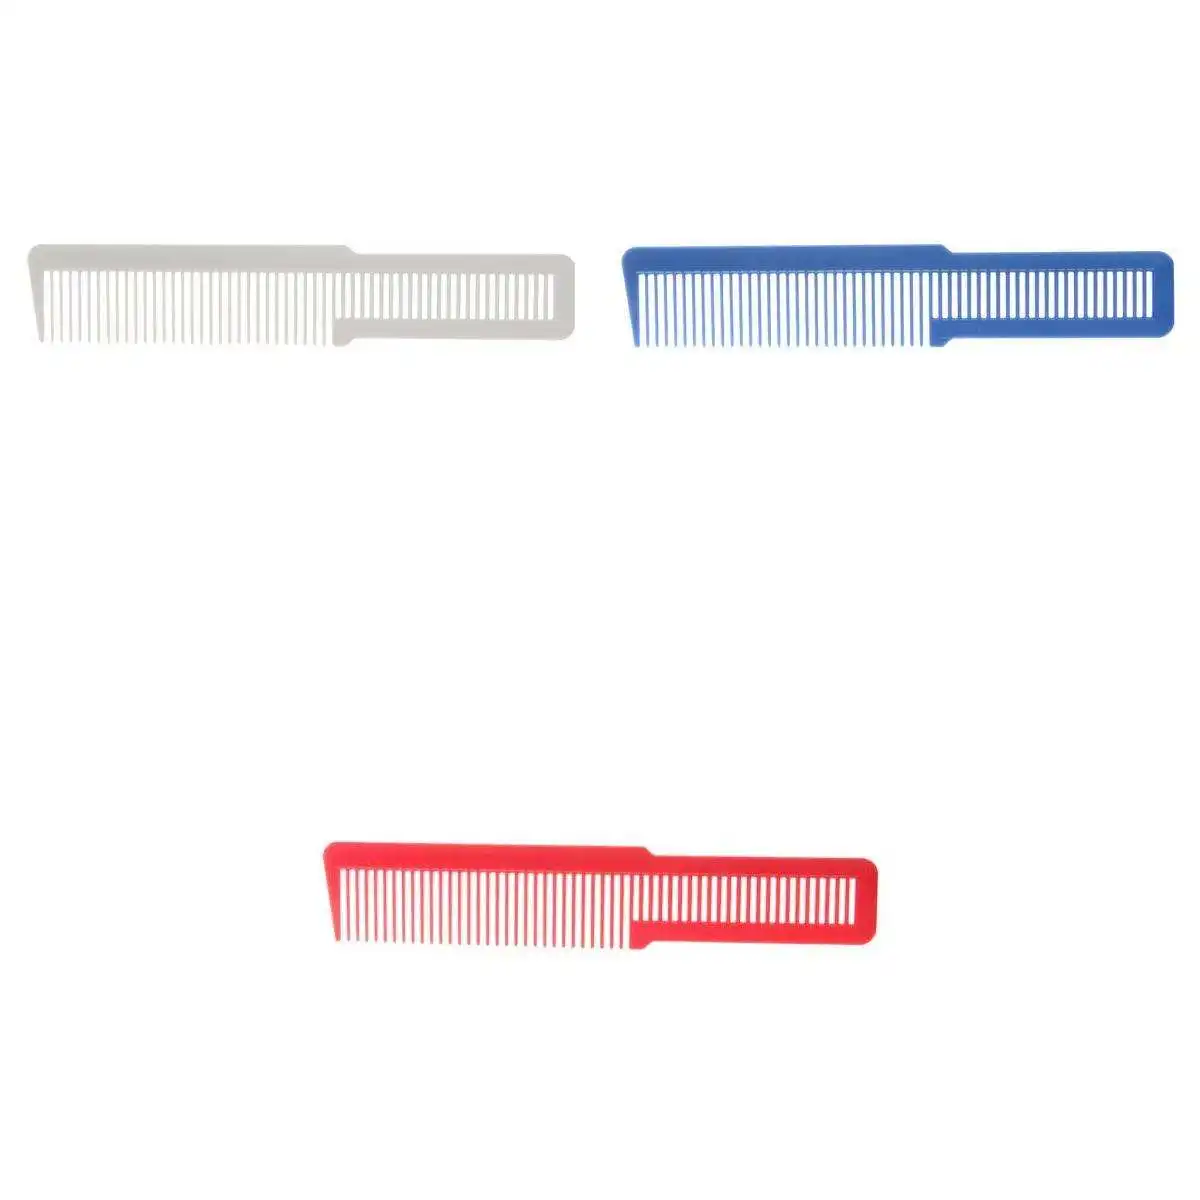 3x Pro Flat Top Hair Comb Barber Hair Hairdressing Combs for Home Salon Use